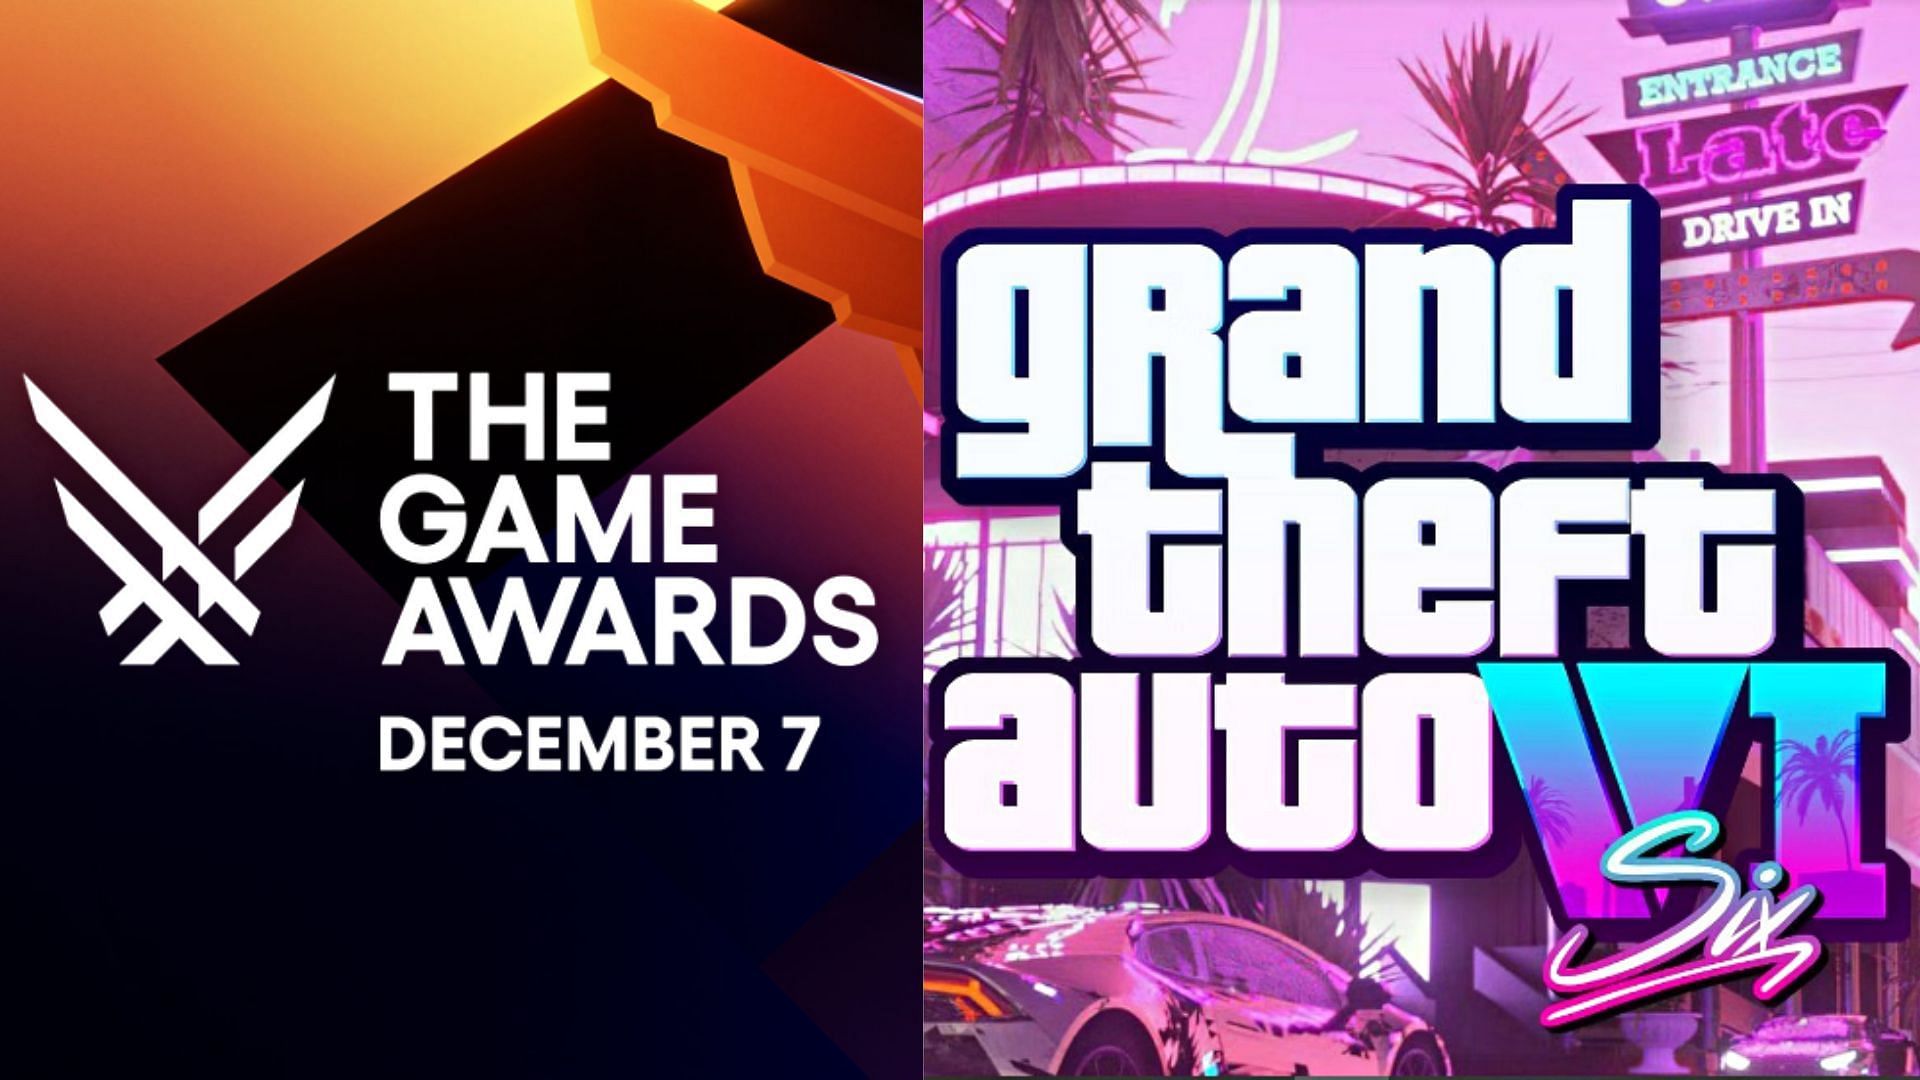 Rockstar Games is part of the advisory board for The Game Awards 2023